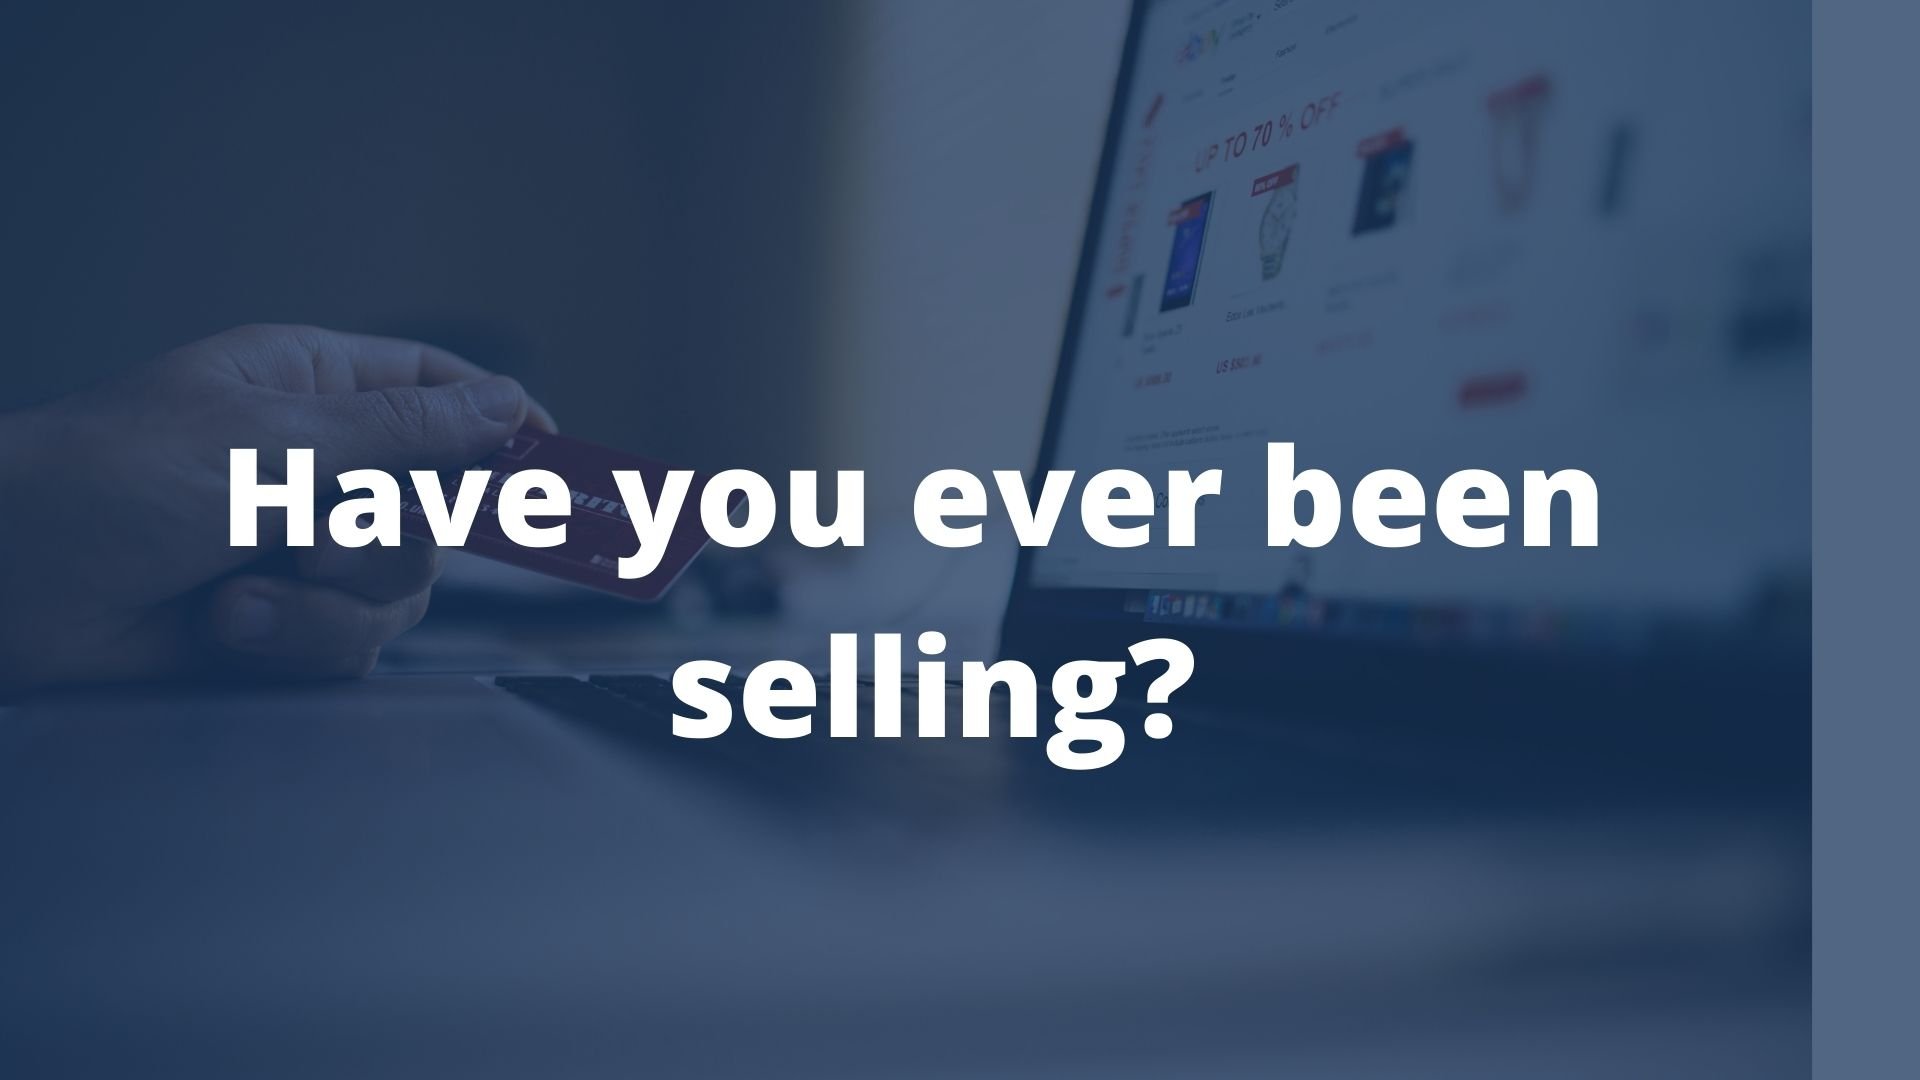 Have you ever been selling?